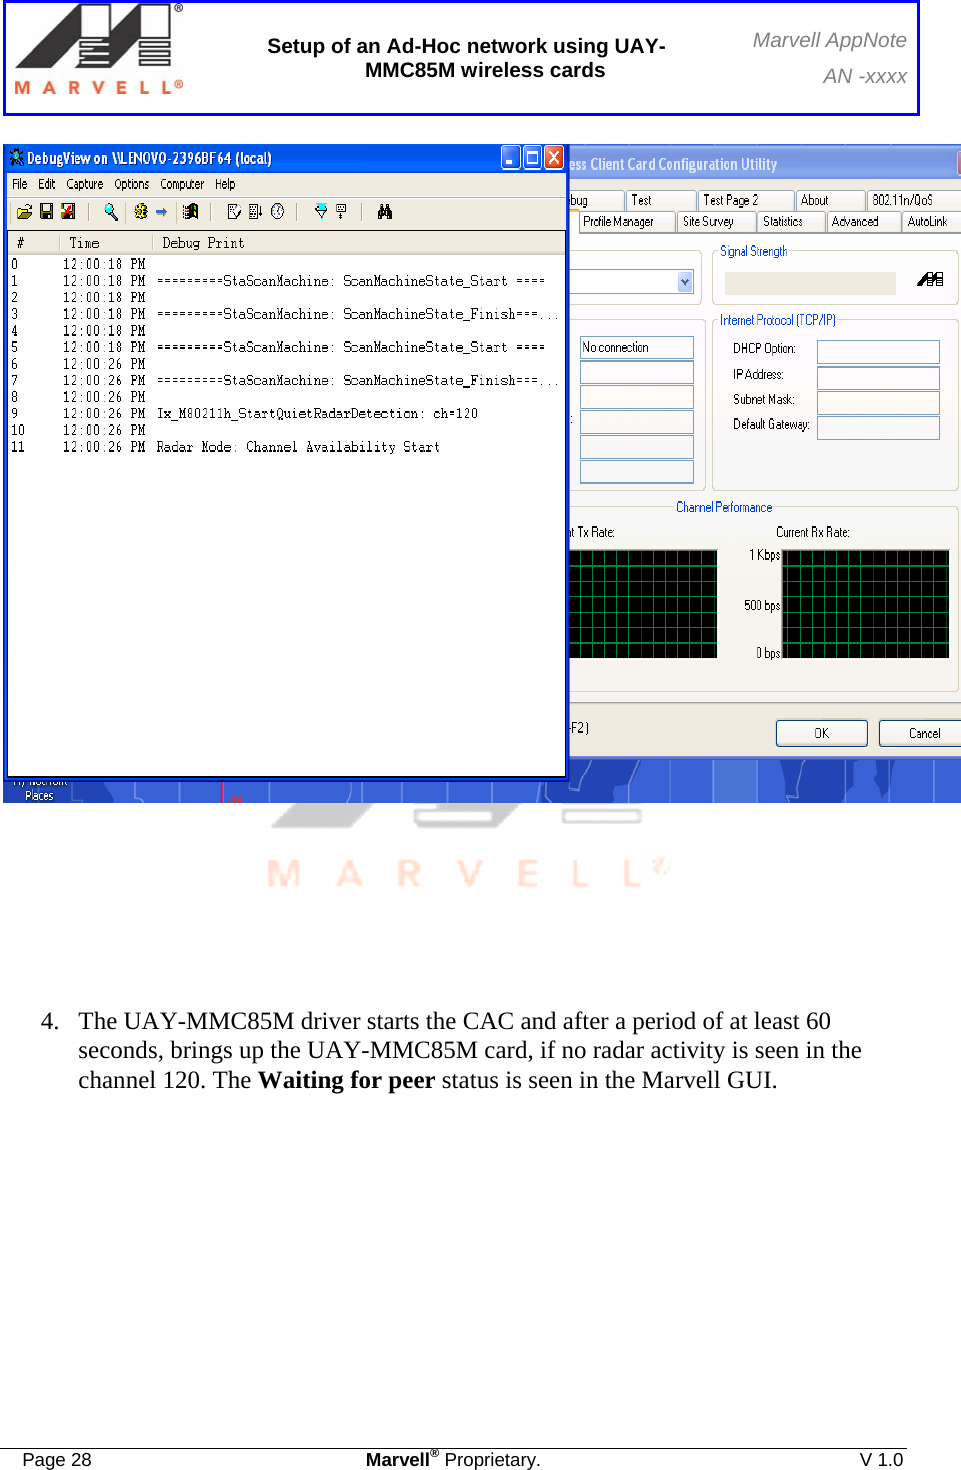  Setup of an Ad-Hoc network using UAY-MMC85M wireless cards Marvell AppNoteAN -xxxx  Page 28  Marvell® Proprietary.  V 1.0         4. The UAY-MMC85M driver starts the CAC and after a period of at least 60 seconds, brings up the UAY-MMC85M card, if no radar activity is seen in the channel 120. The Waiting for peer status is seen in the Marvell GUI.     